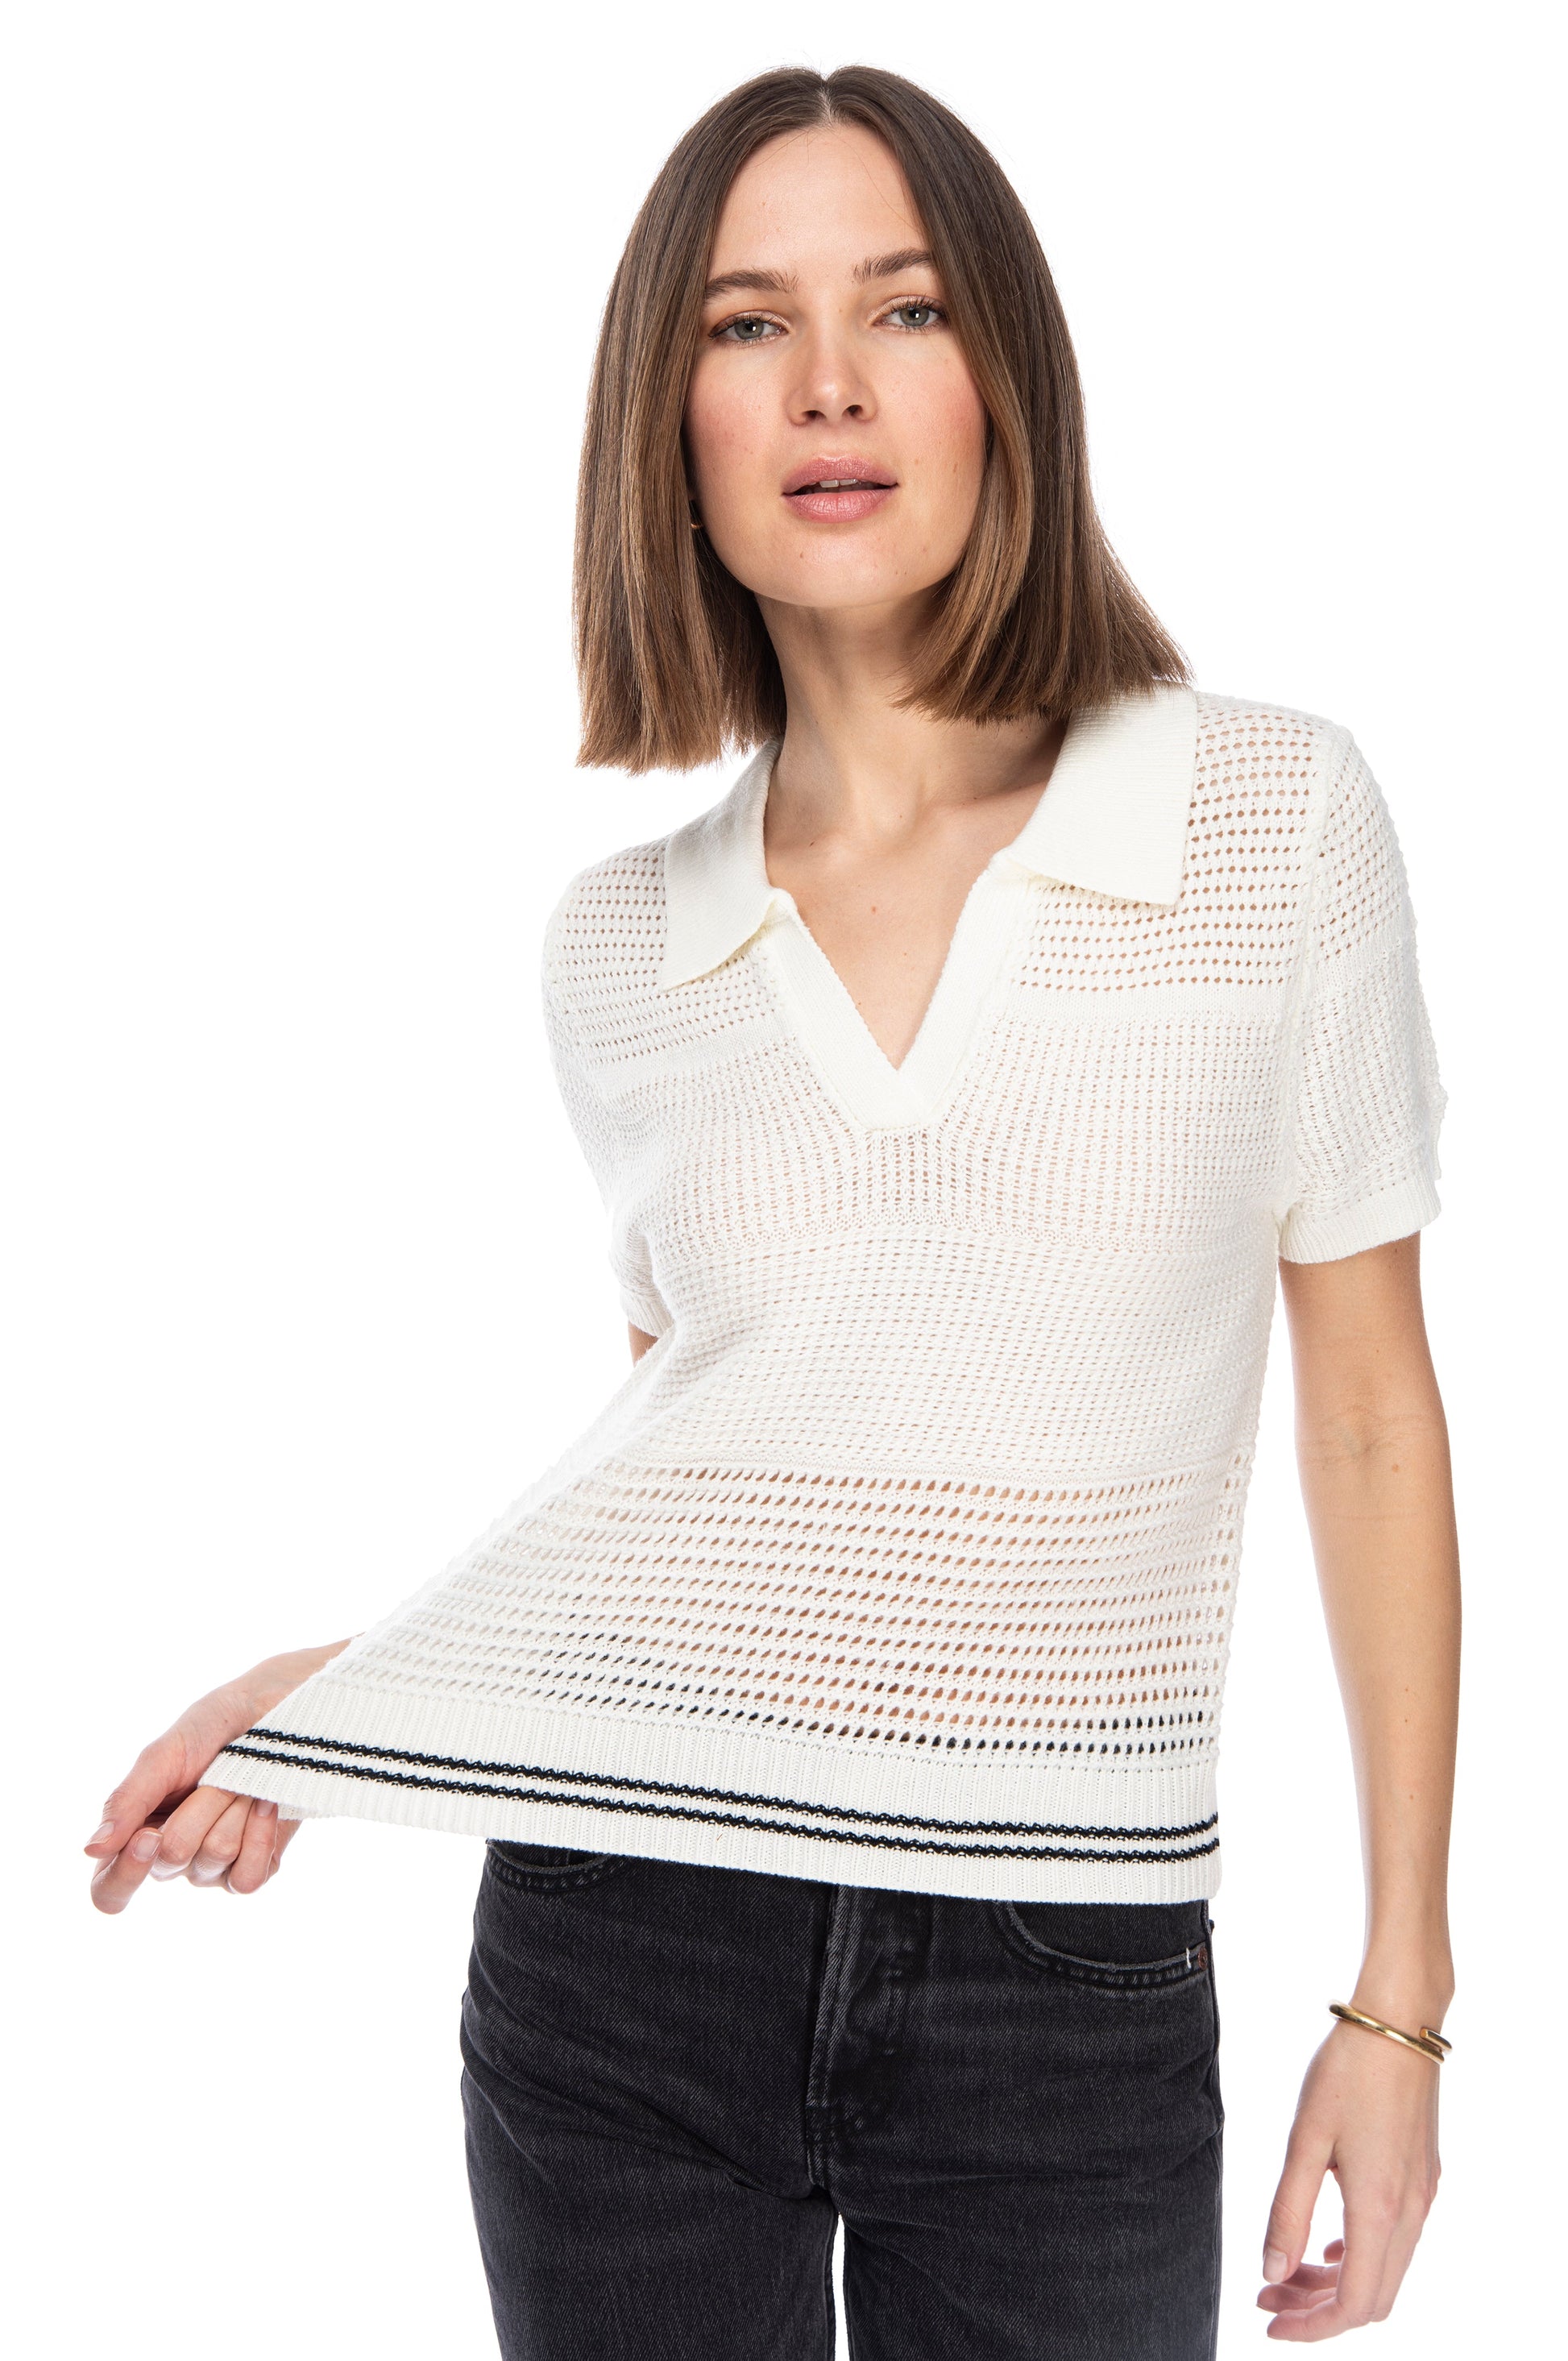 Woman showcasing a B Collection by Bobeau white acrylic knit POLO OPEN WEAVE SWEATER with collar detail, paired with black jeans, against a white background.